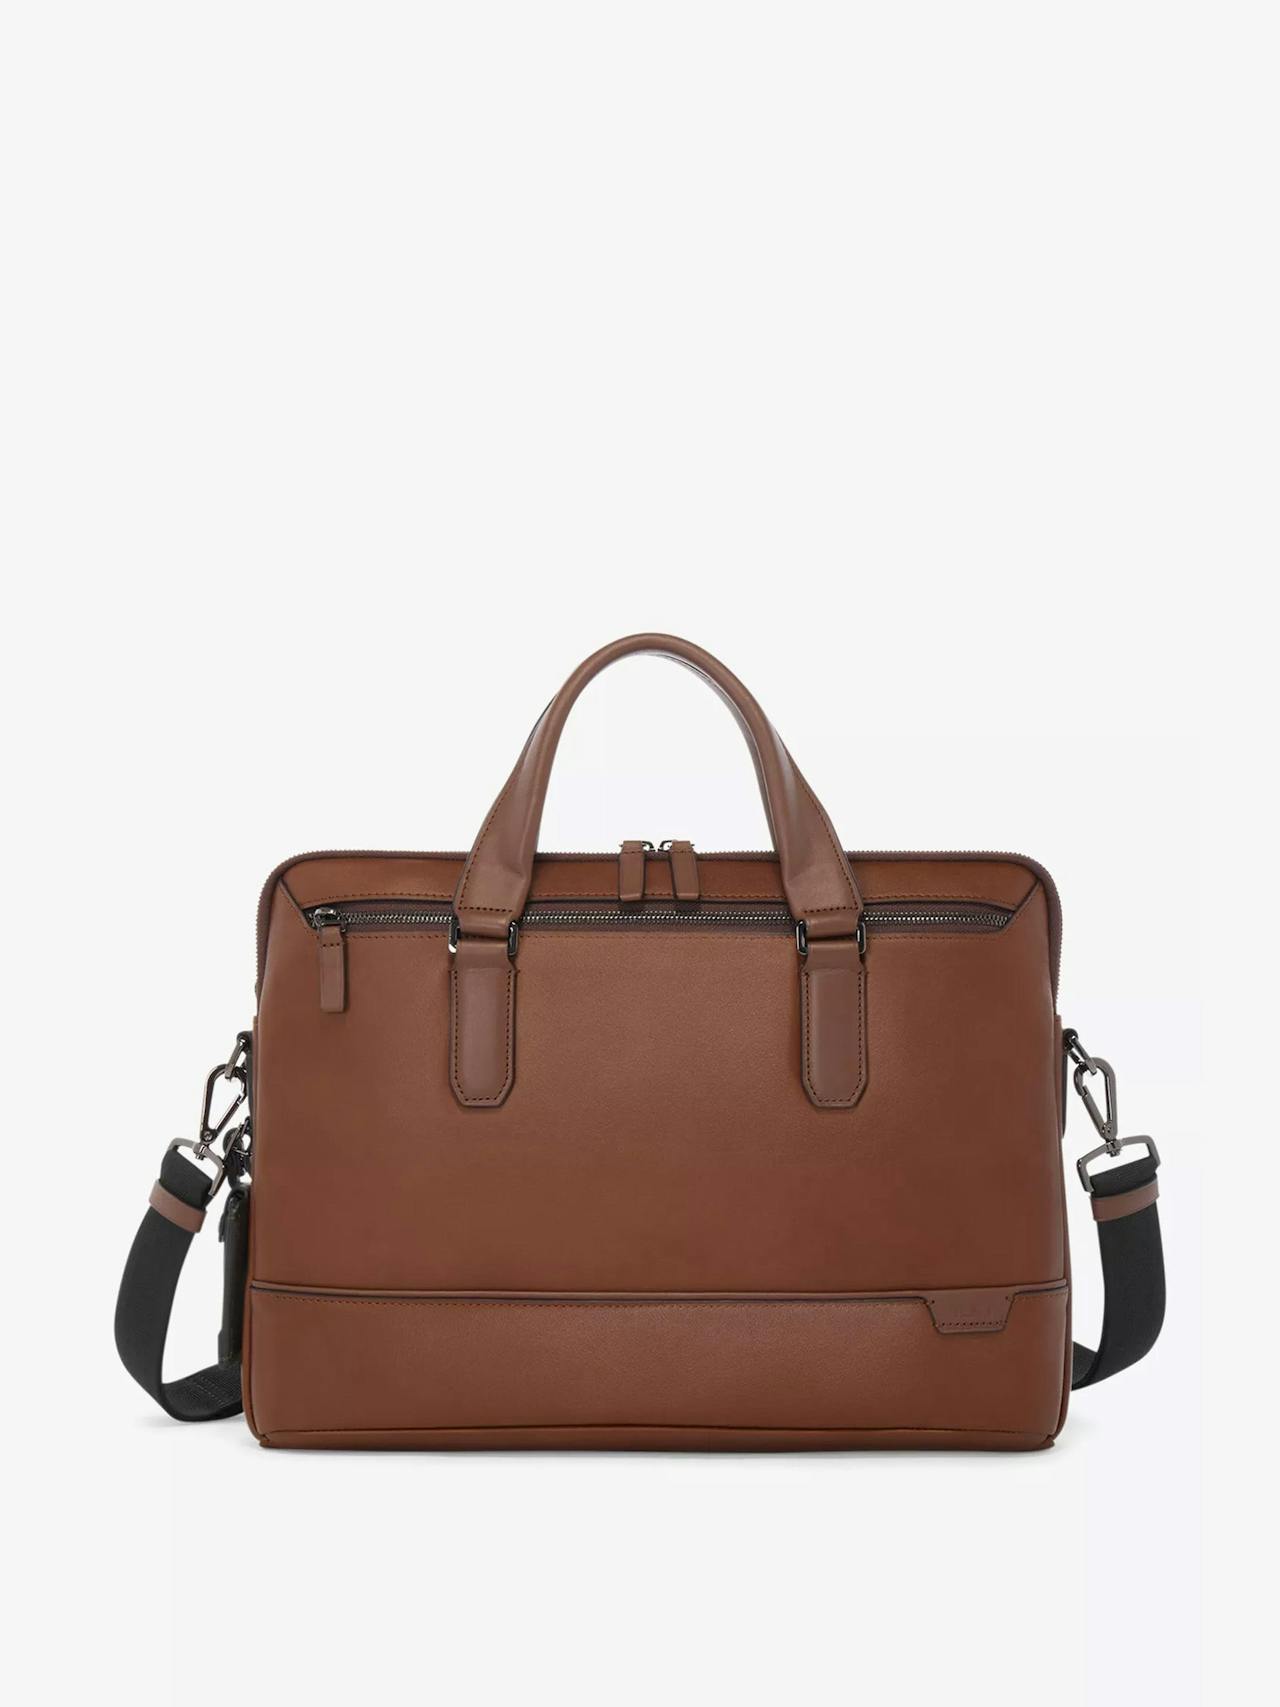 Harrison Sycamore leather briefcase